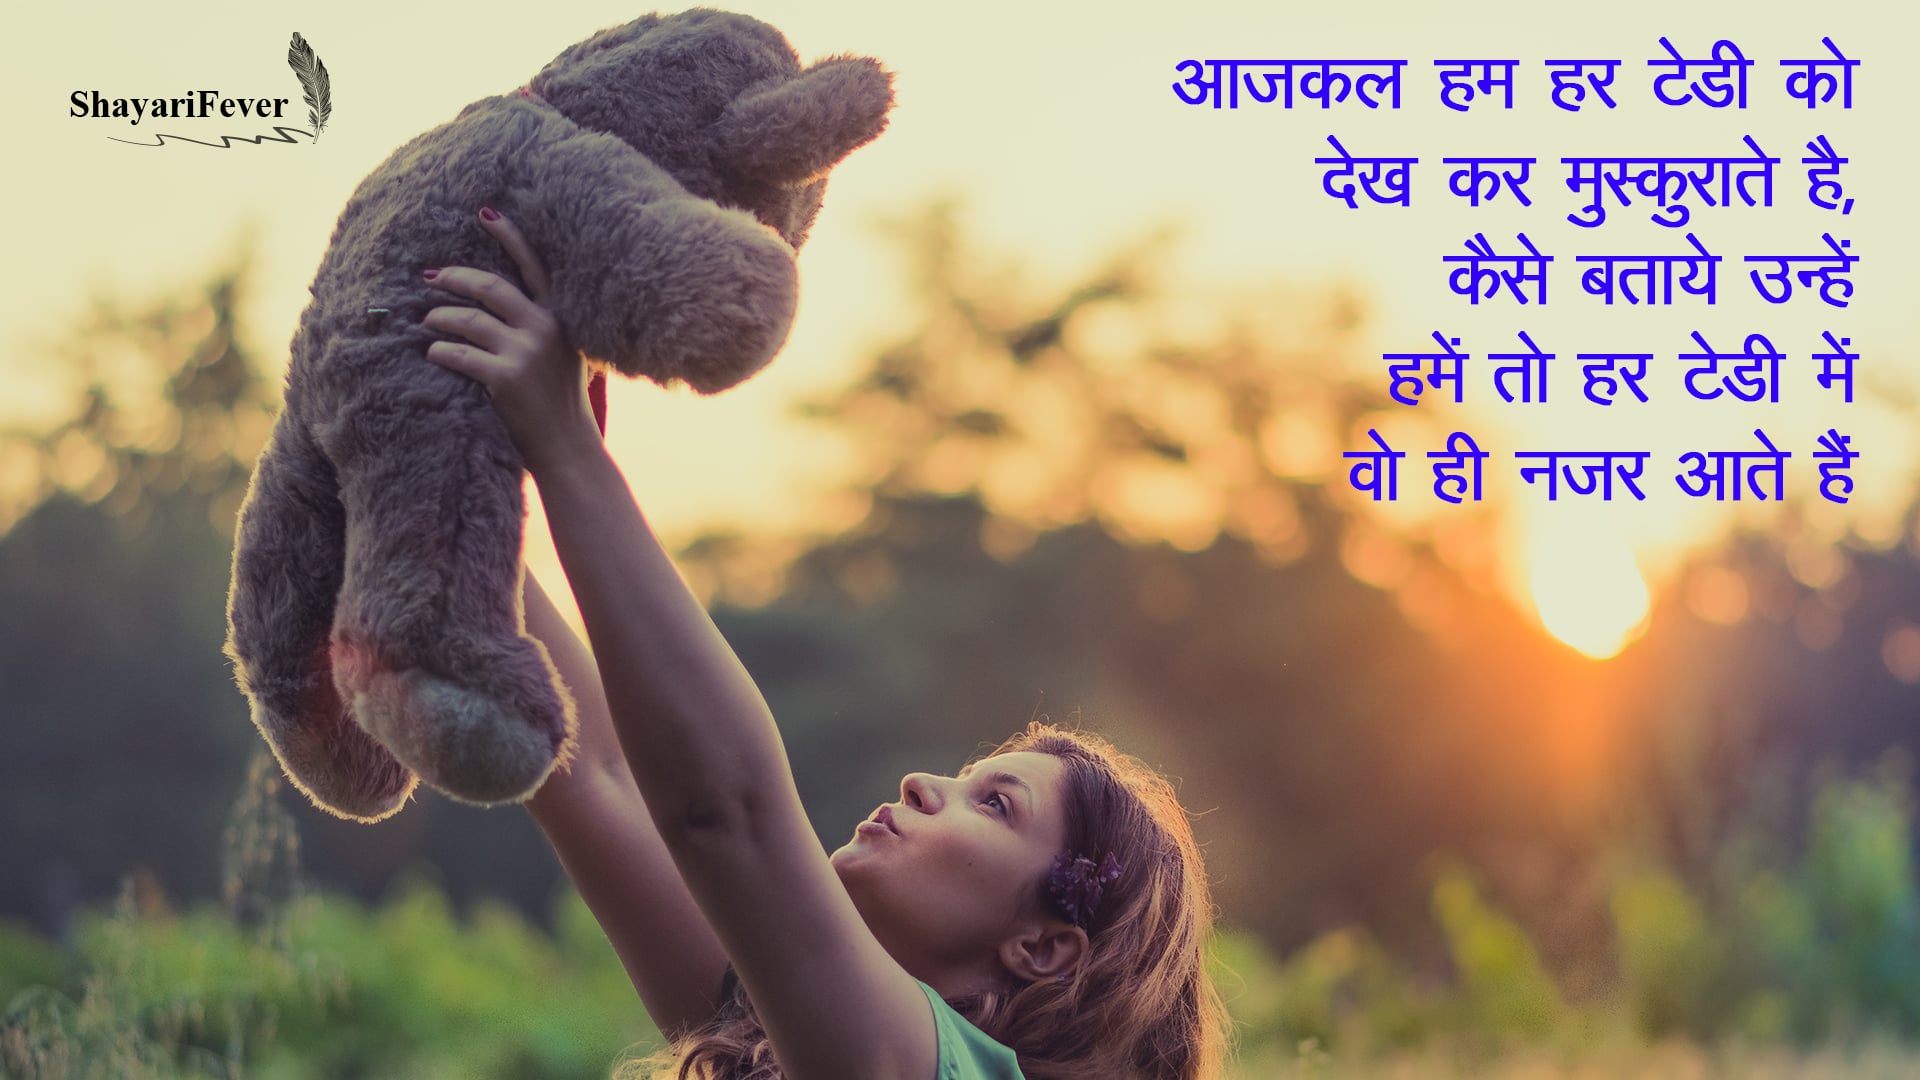 Teddy Day Wishes In Hindi